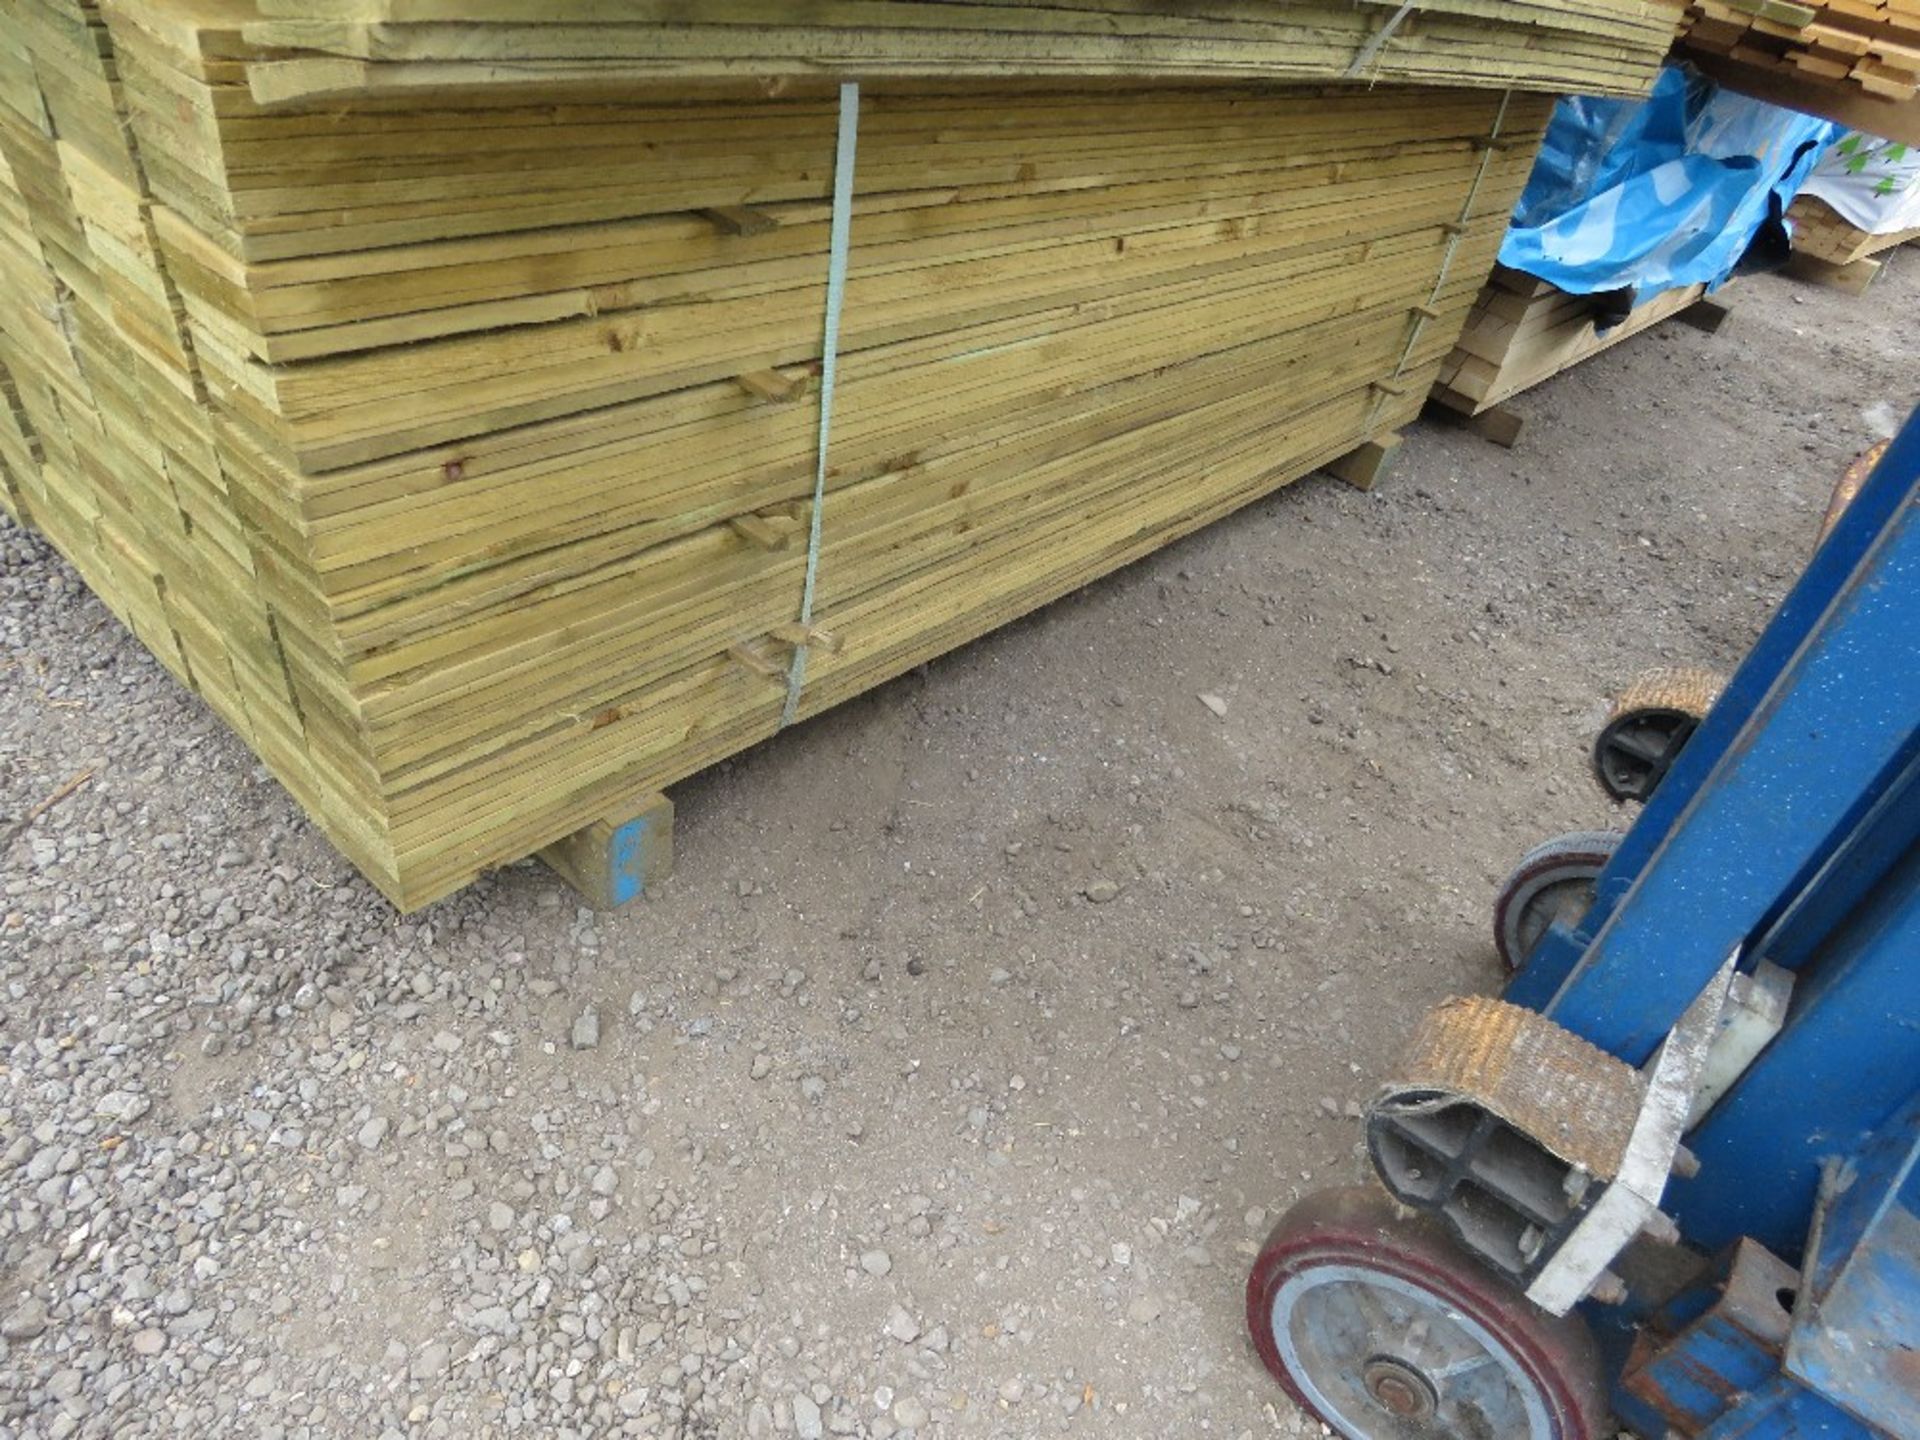 LARGE PACK OF PRESSURE TREATED FEATHER EDGE FENCE CLADDING TIMBER BOARDS: 1.80M LENGTH X 100MM WIDTH - Image 3 of 3